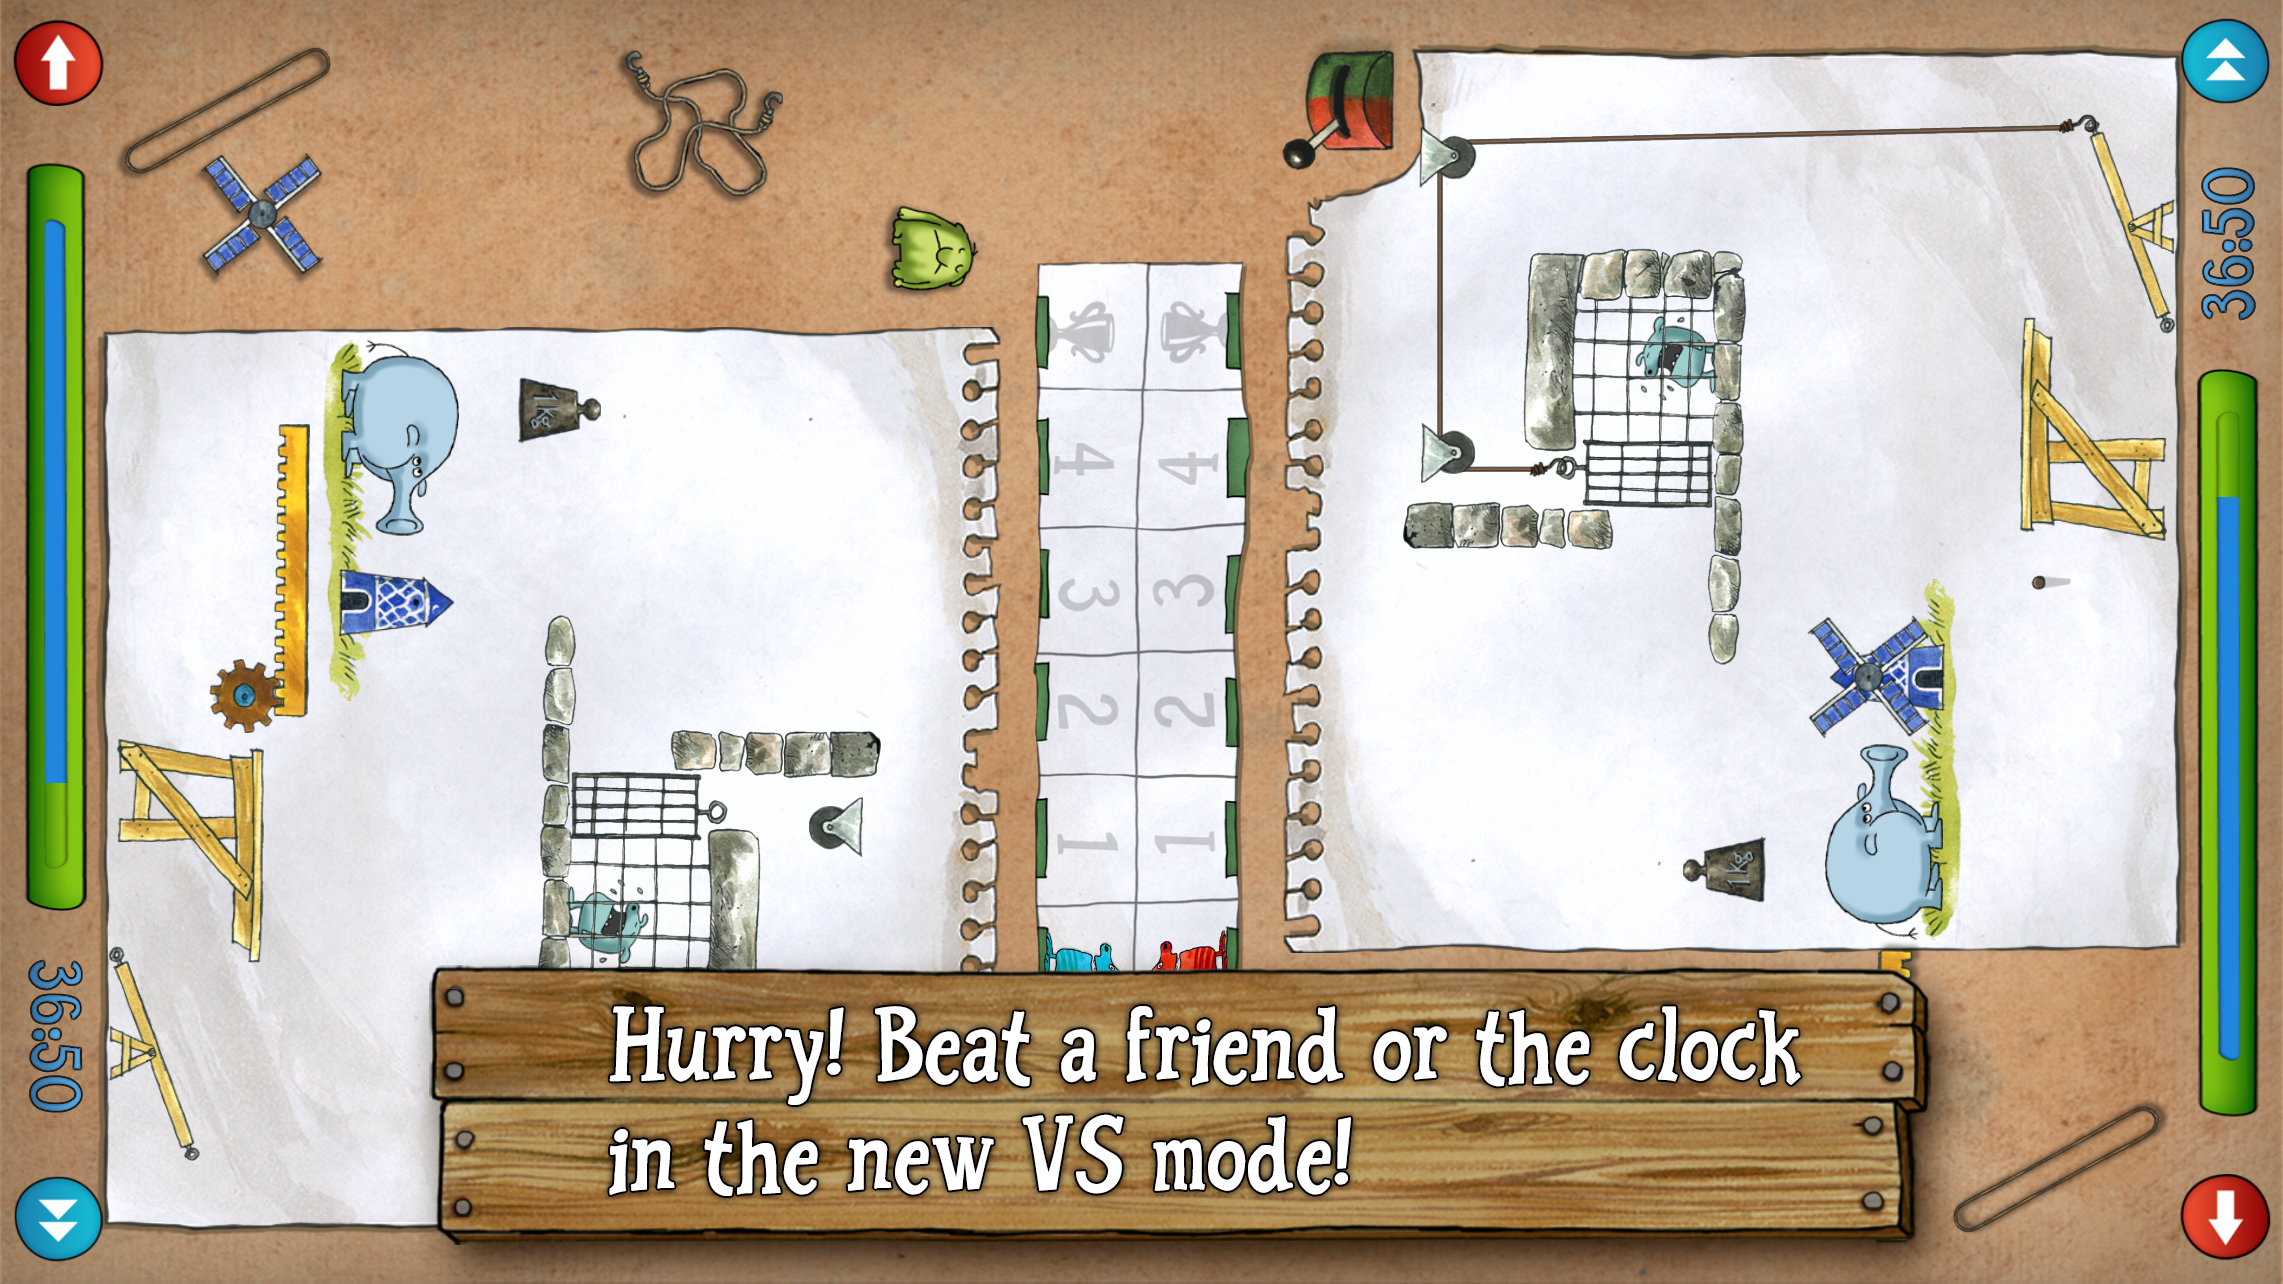 Android application Pettson's Inventions Deluxe screenshort